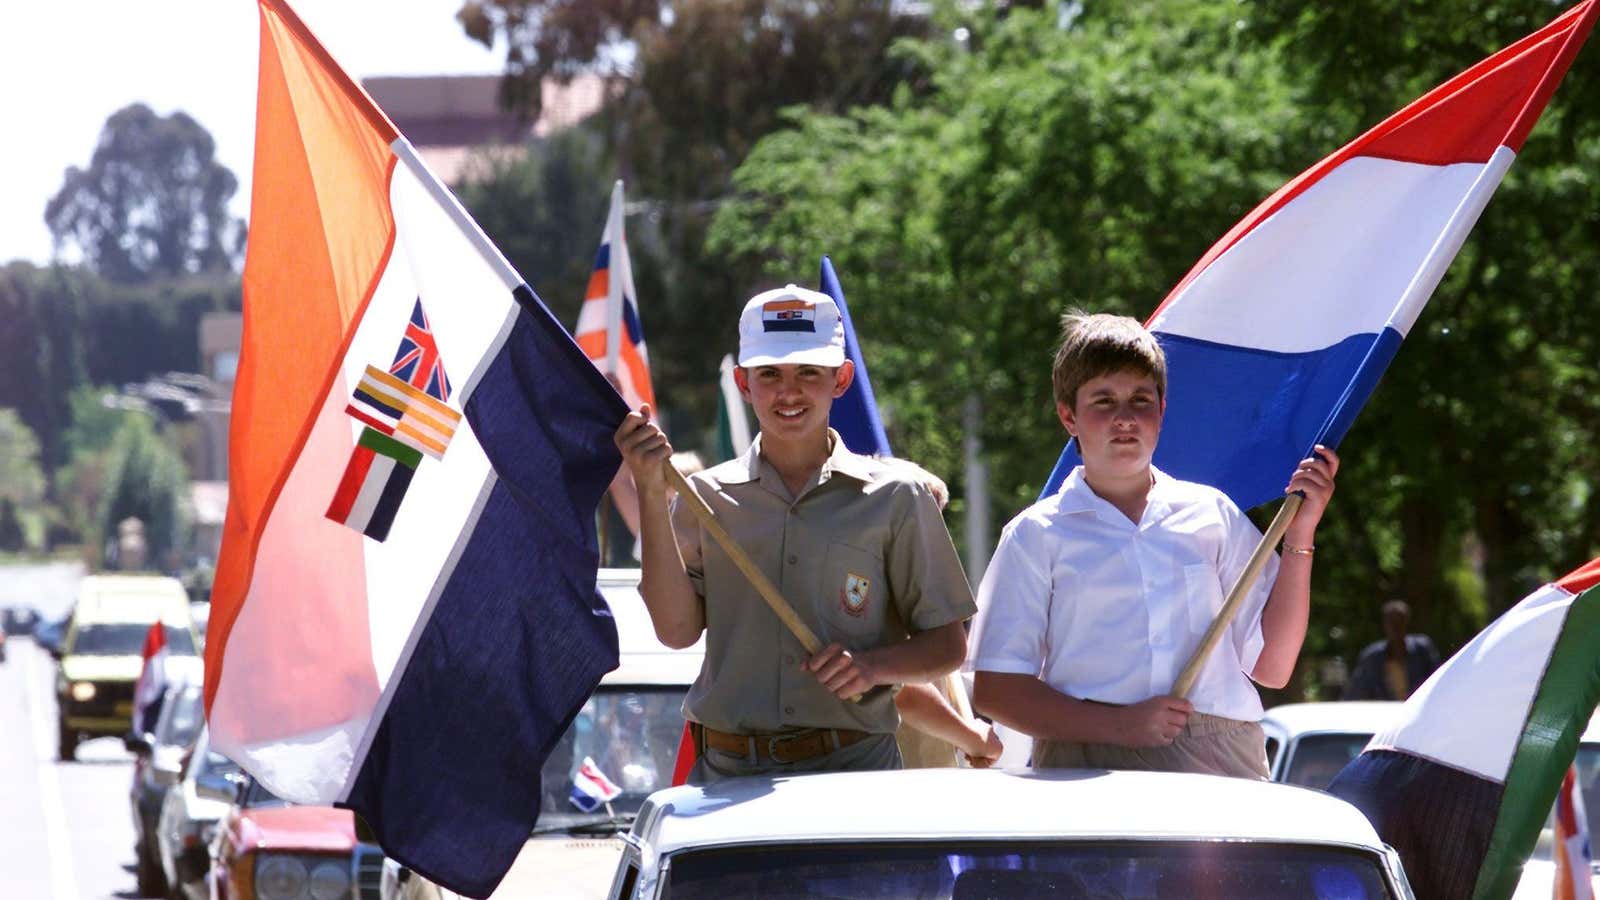 Right Wing Afrikaner flags (South Africa)